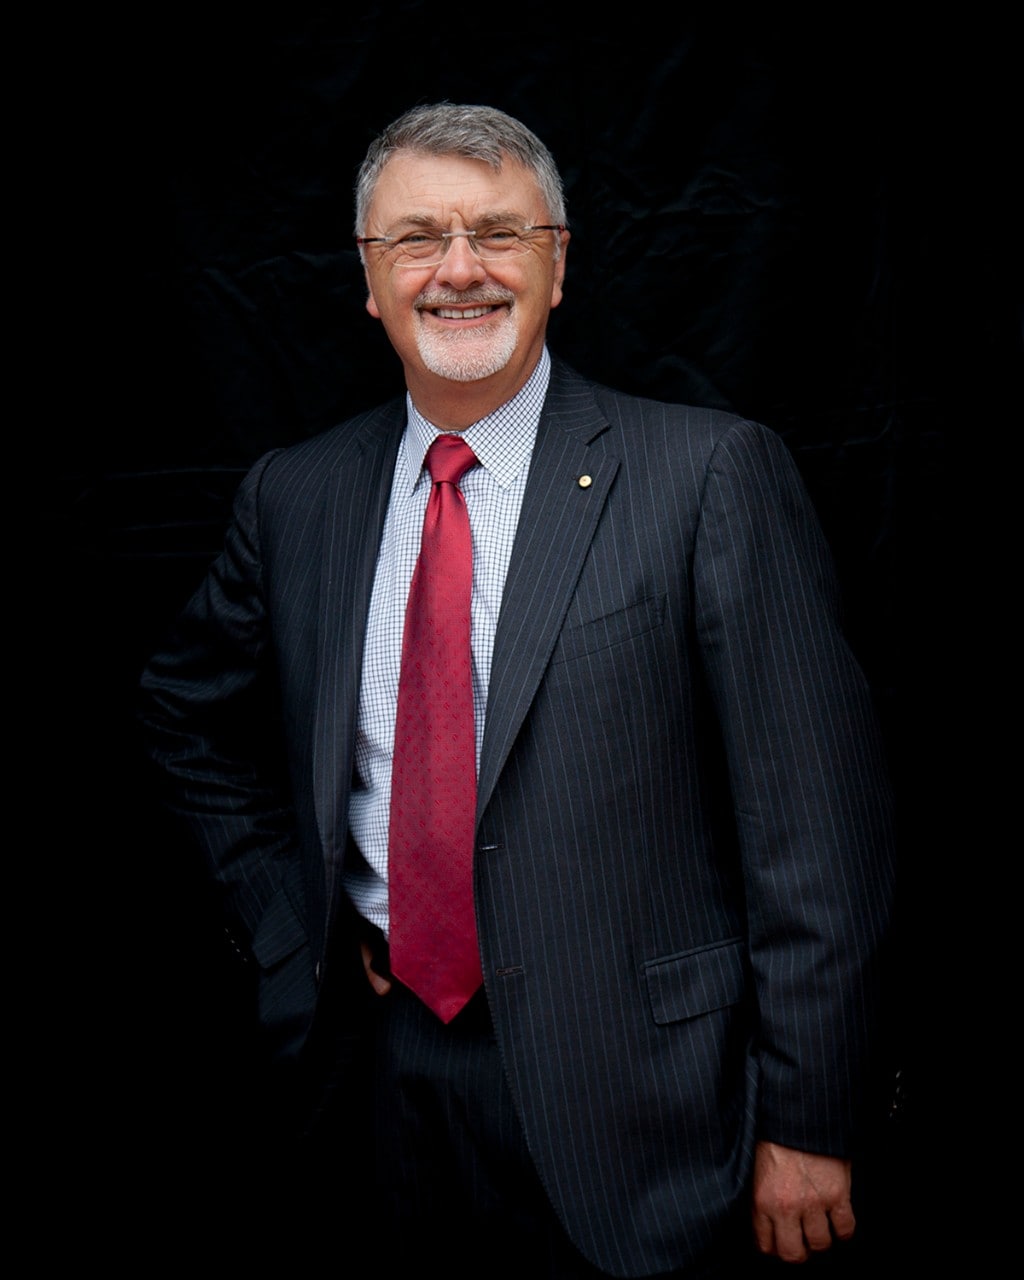 photo of Professor Peter Shergold, an older man in a suit, on a black background